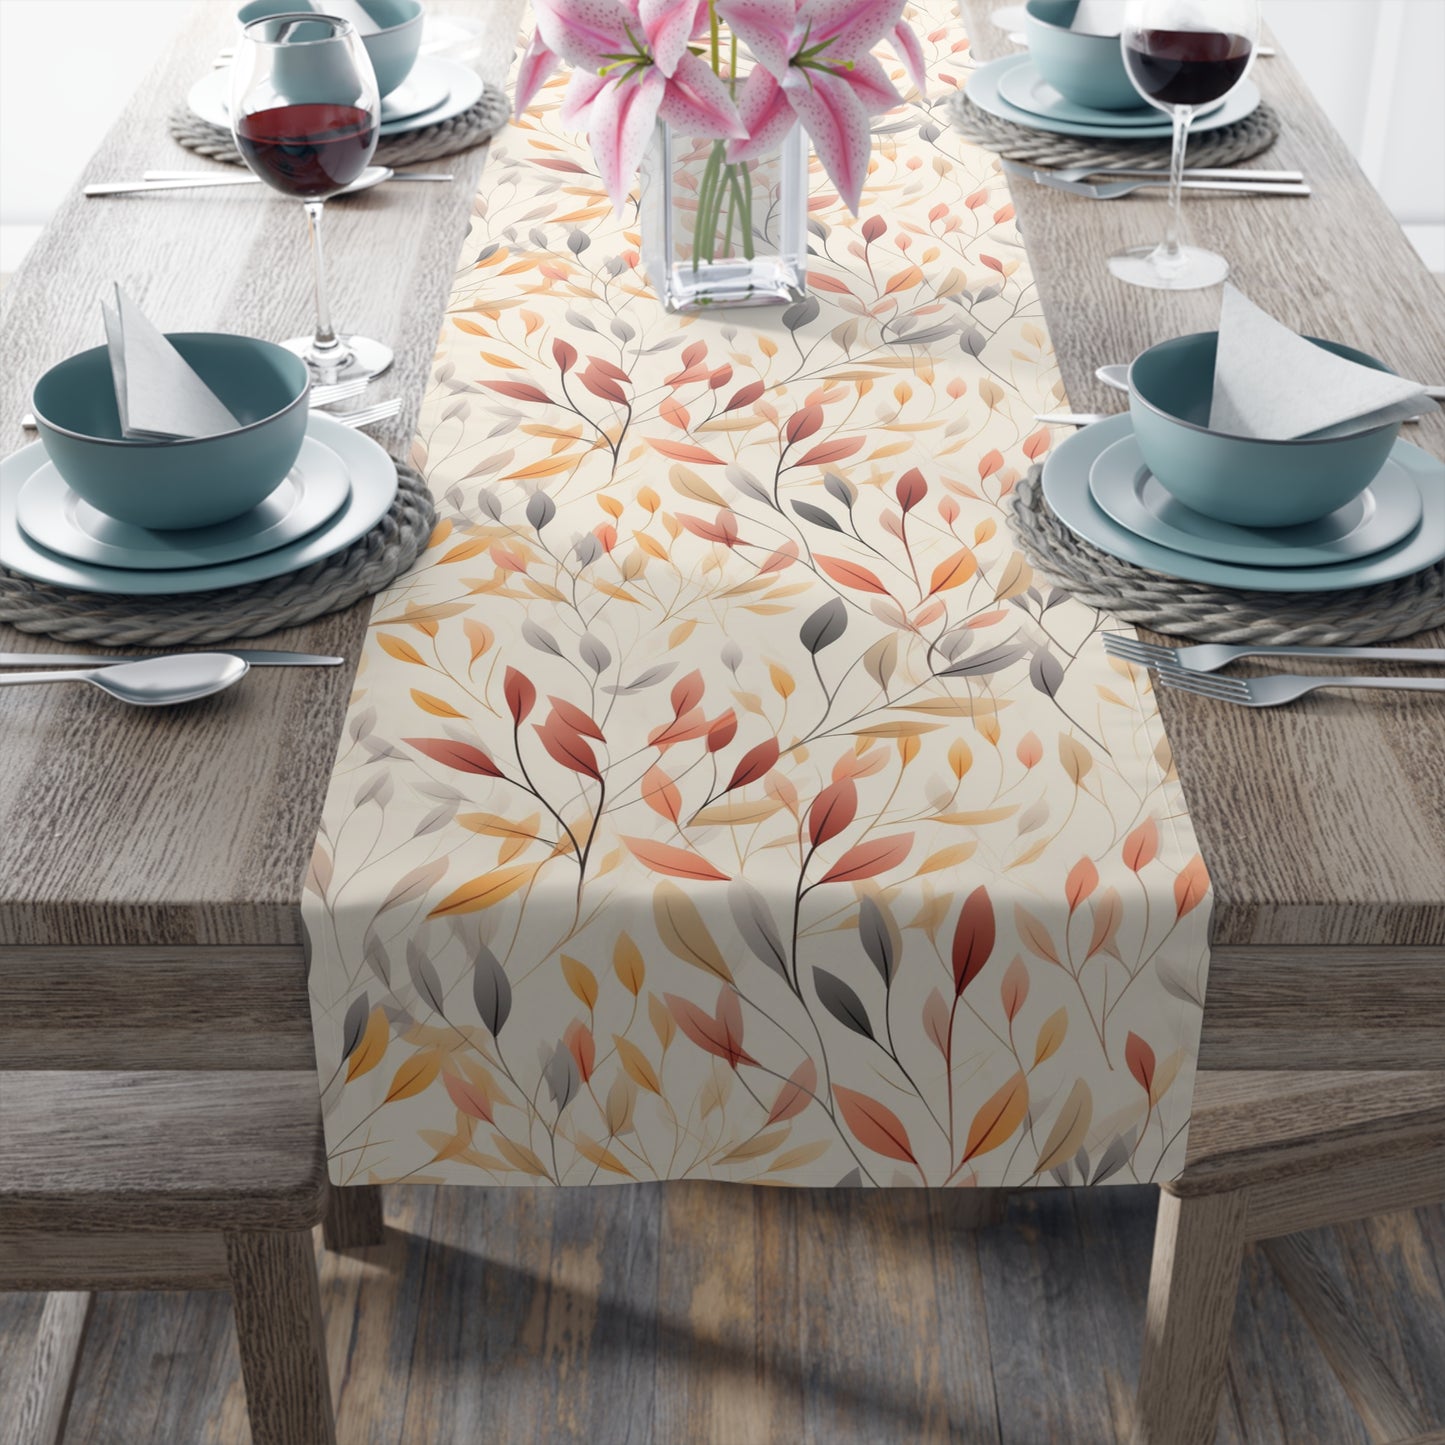 Fall Colors Table Runner